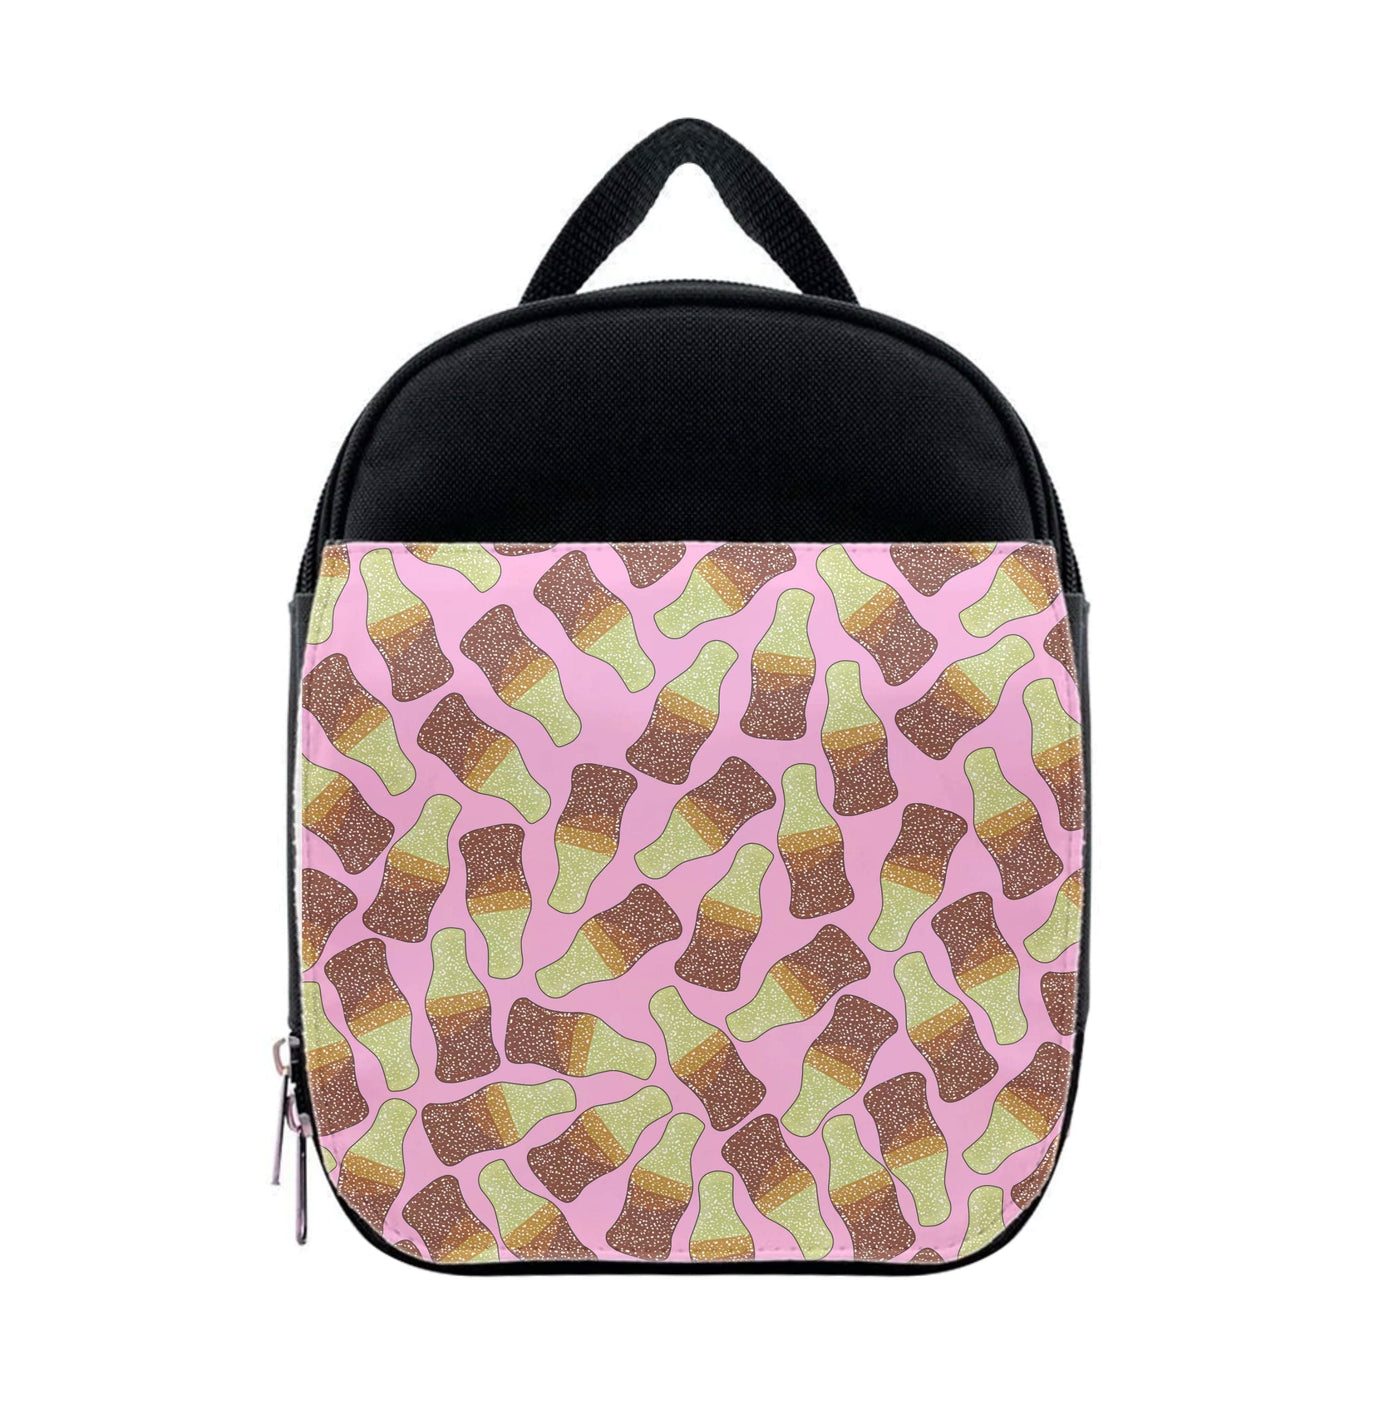 Cola Bottles - Sweets Patterns Lunchbox